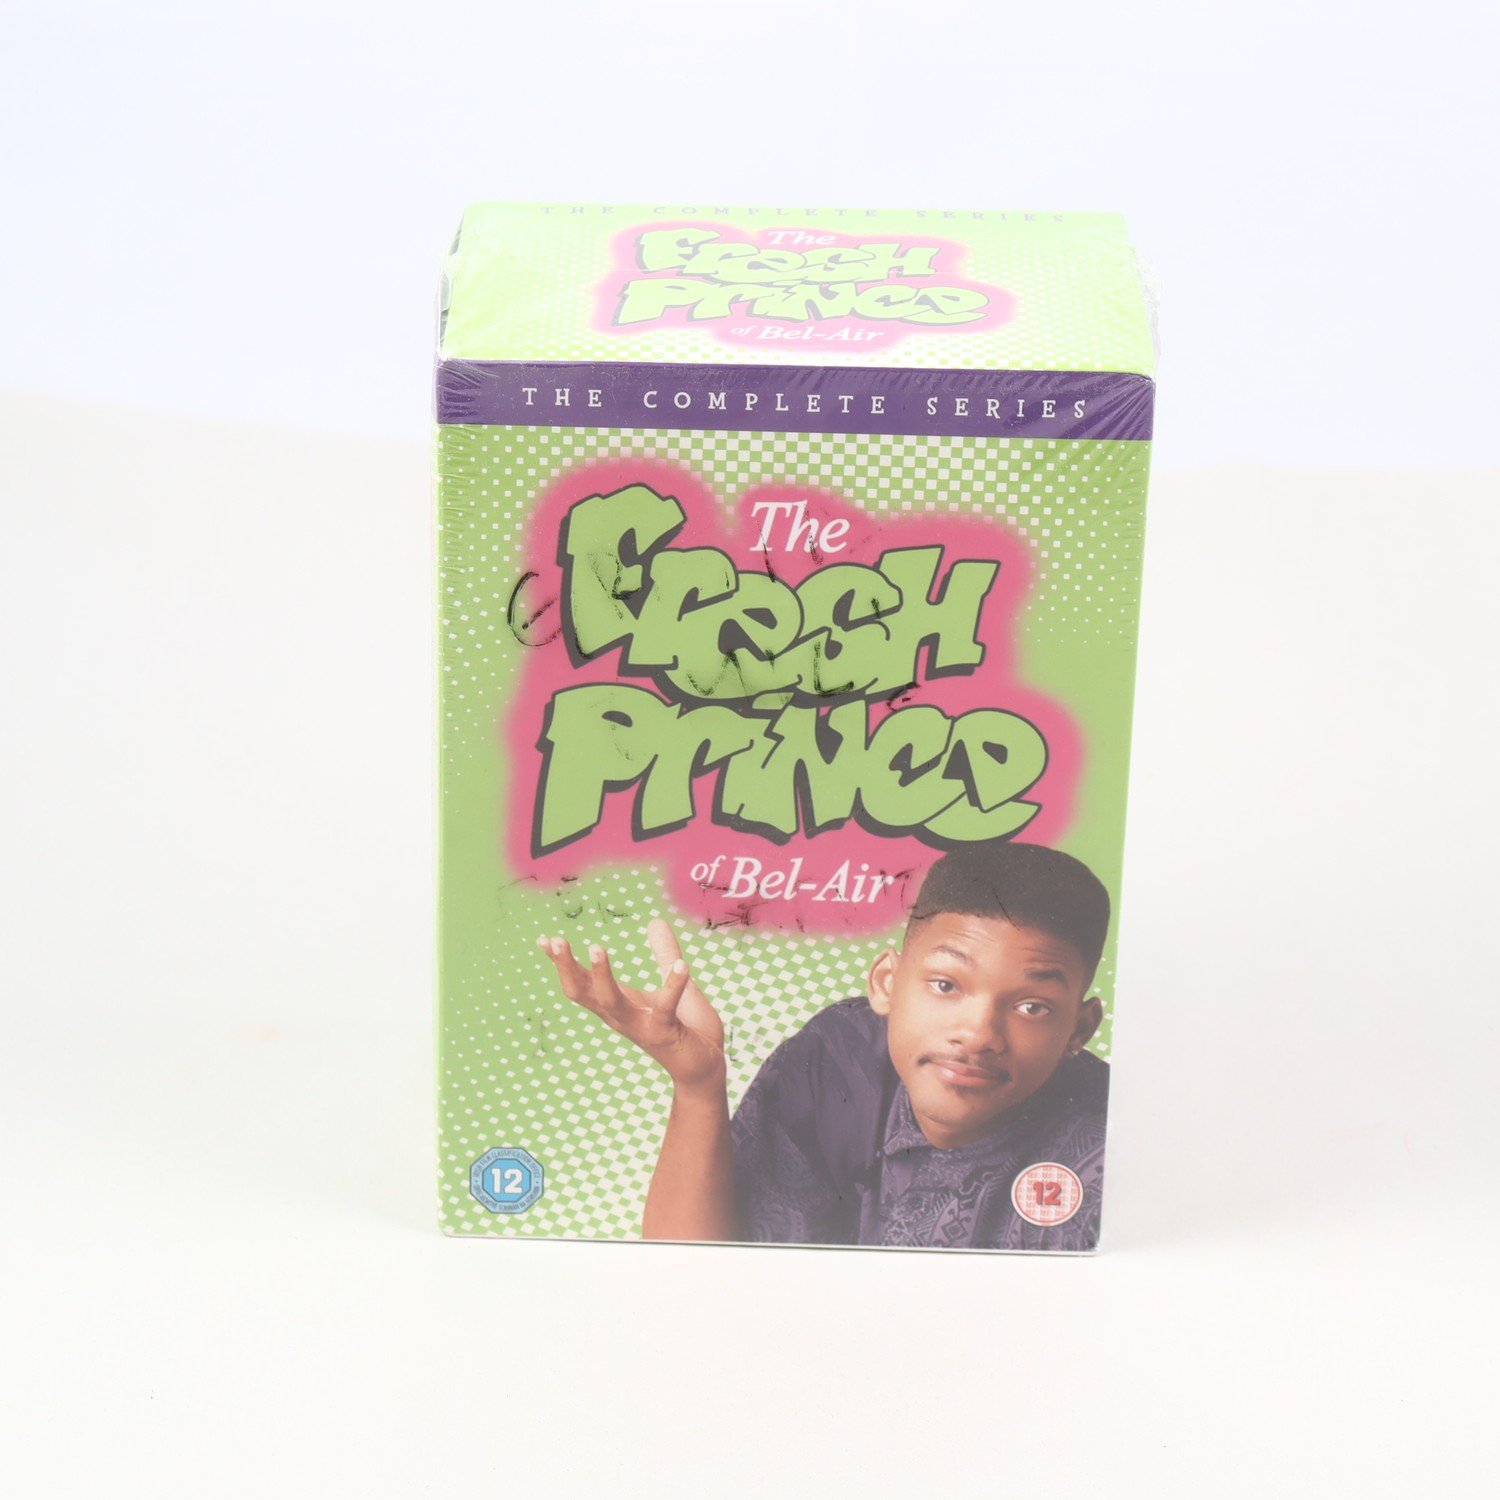 DVD The Fresh Prince of Bel-Air, The Complete Series